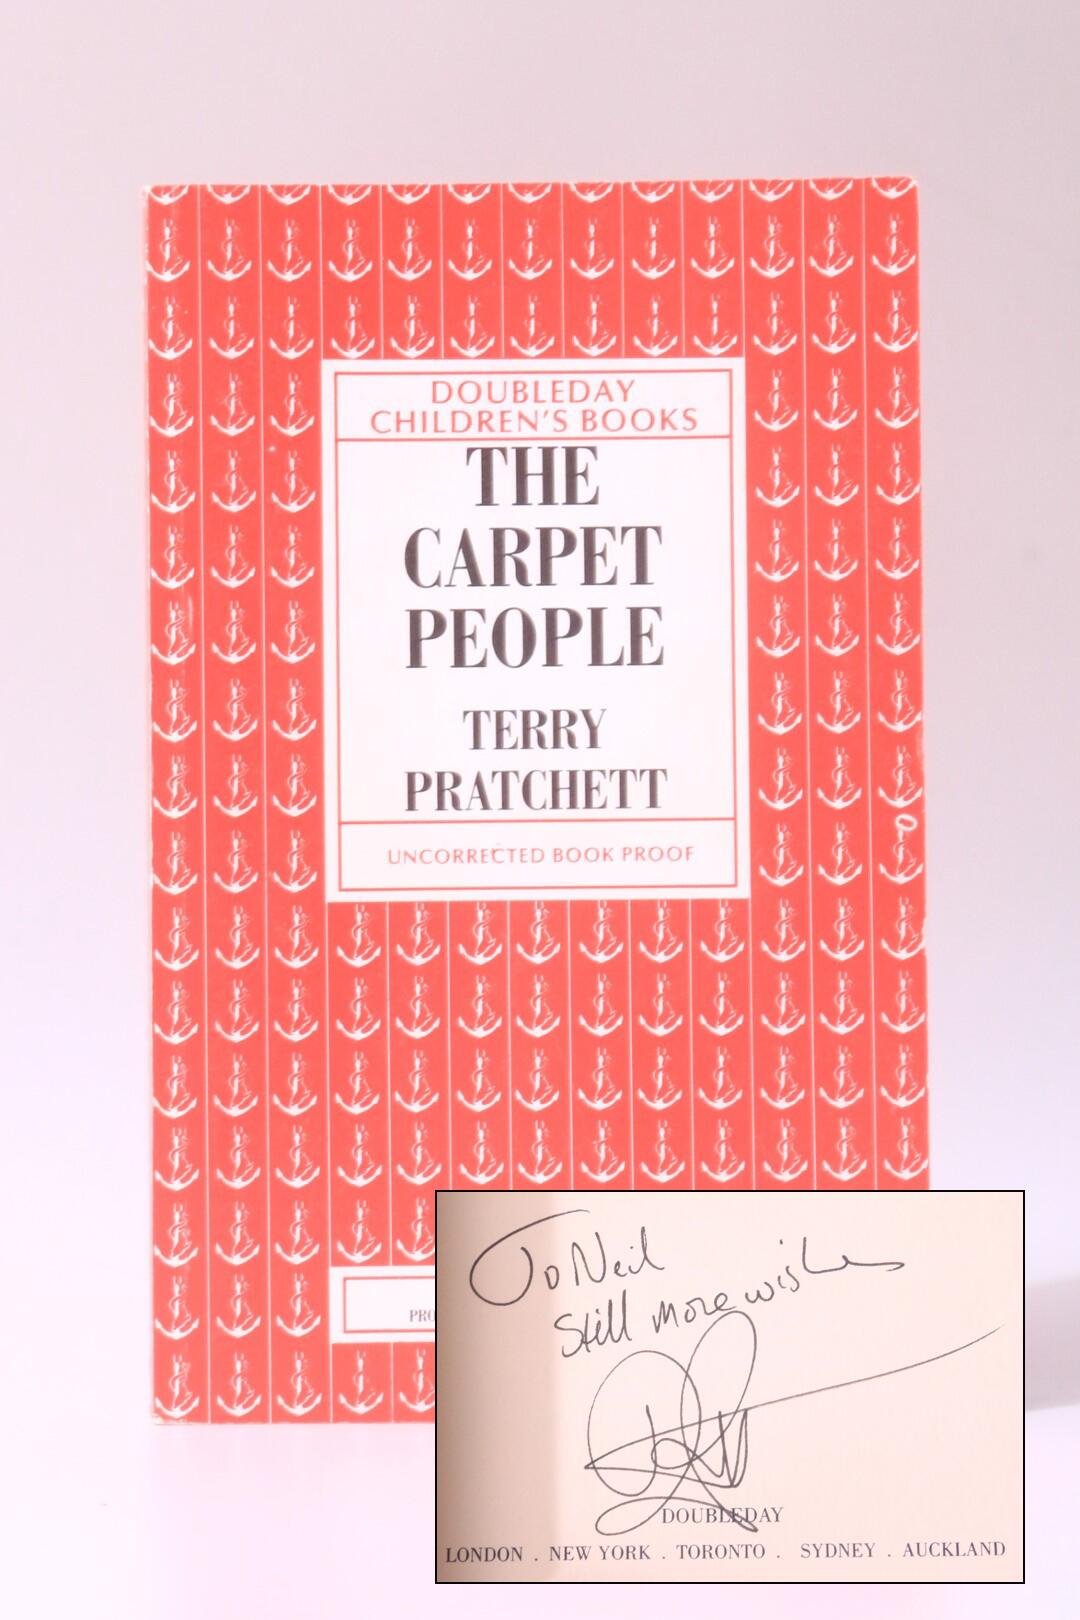 Terry Pratchett - The Carpet People - Doubleday, 1992, Signed Proof.